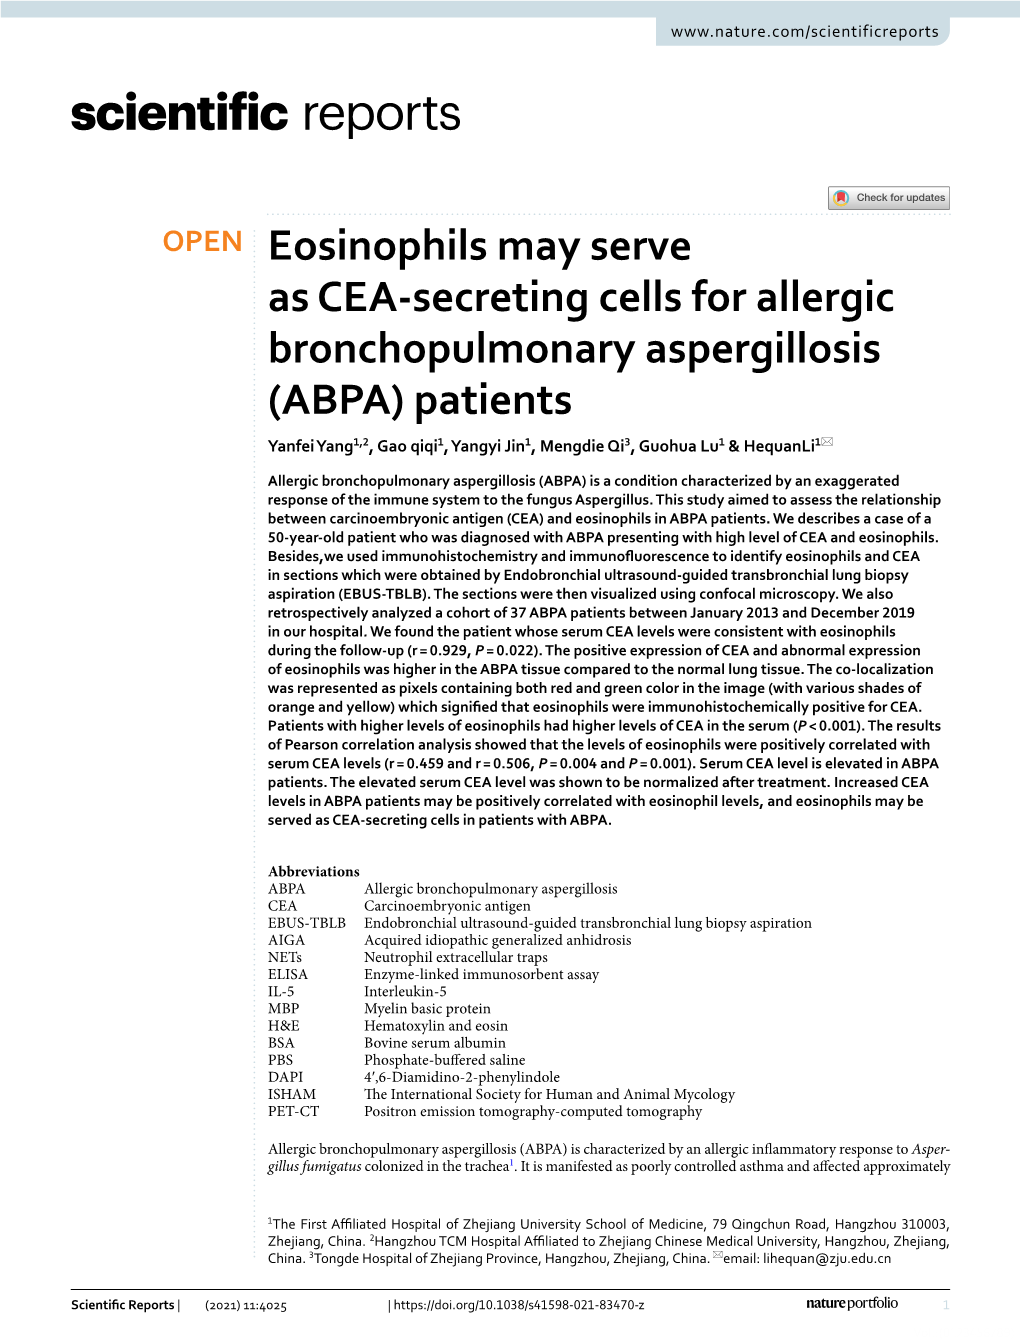 Eosinophils May Serve As CEA-Secreting Cells for Allergic